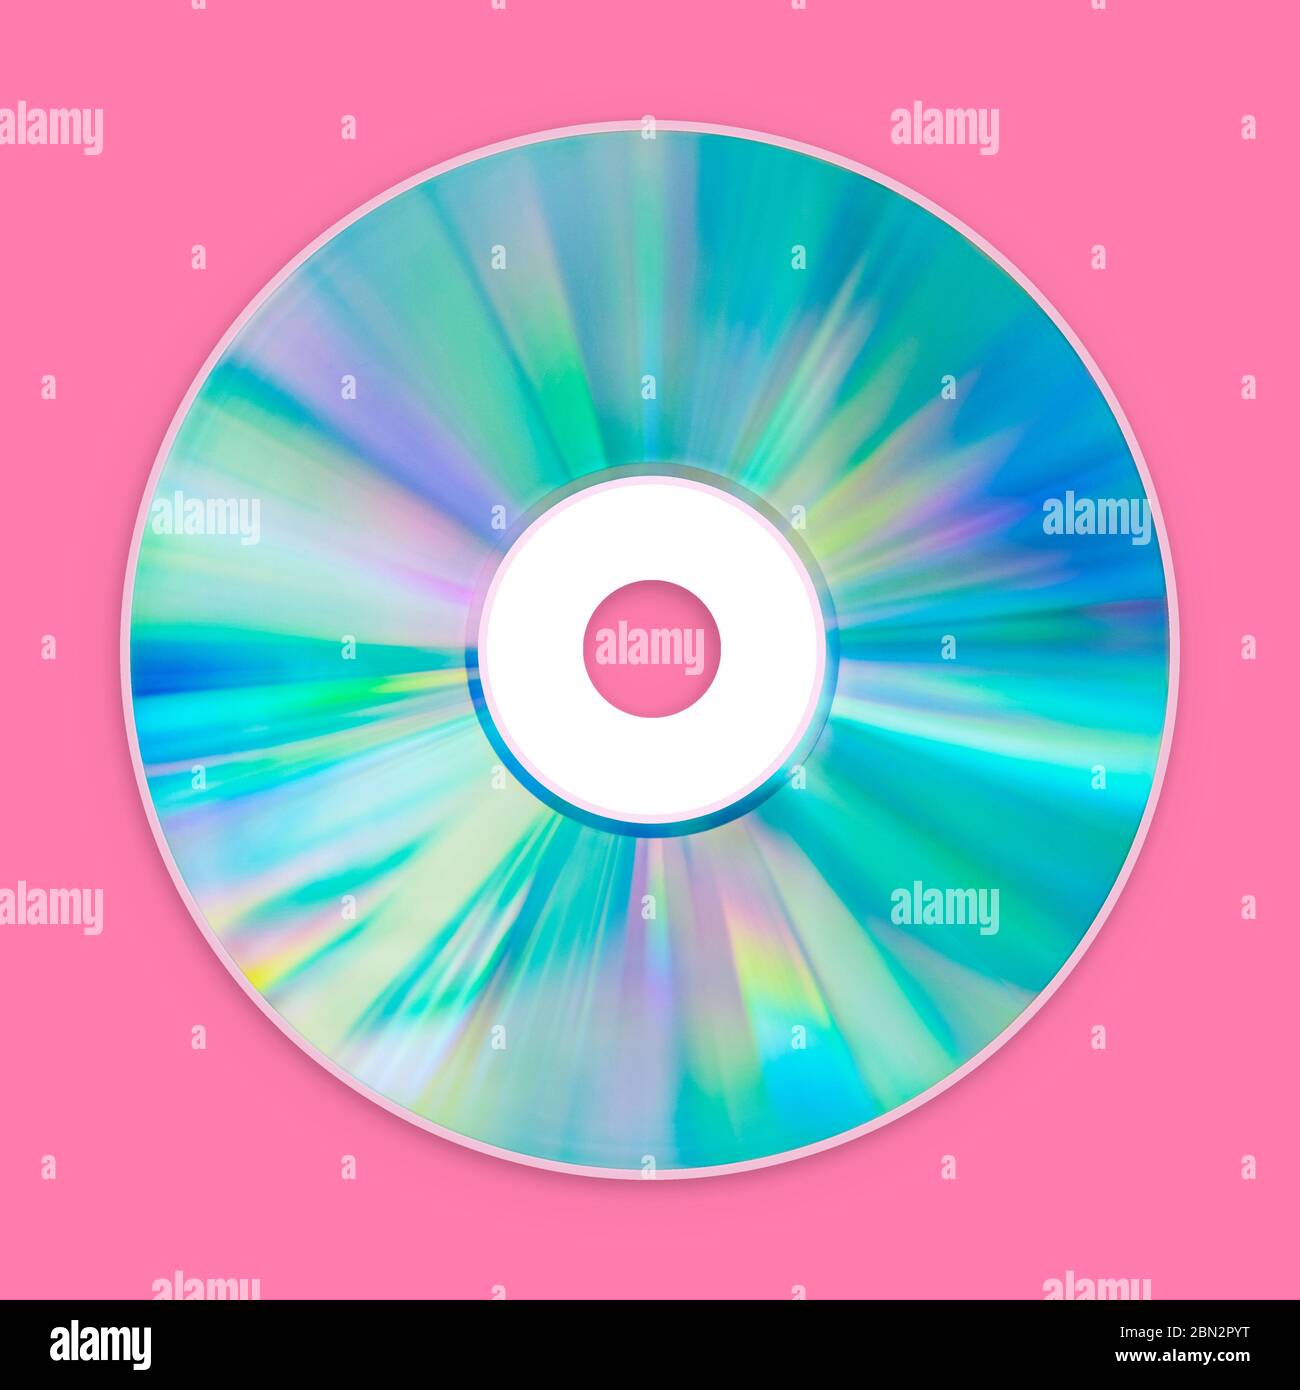 CD Compact Disk, DVD, Blu-ray, for Music, Movies and Data, close up, isolated and presented in punchy pastel colors, for nostalgic creative design Stock Photo